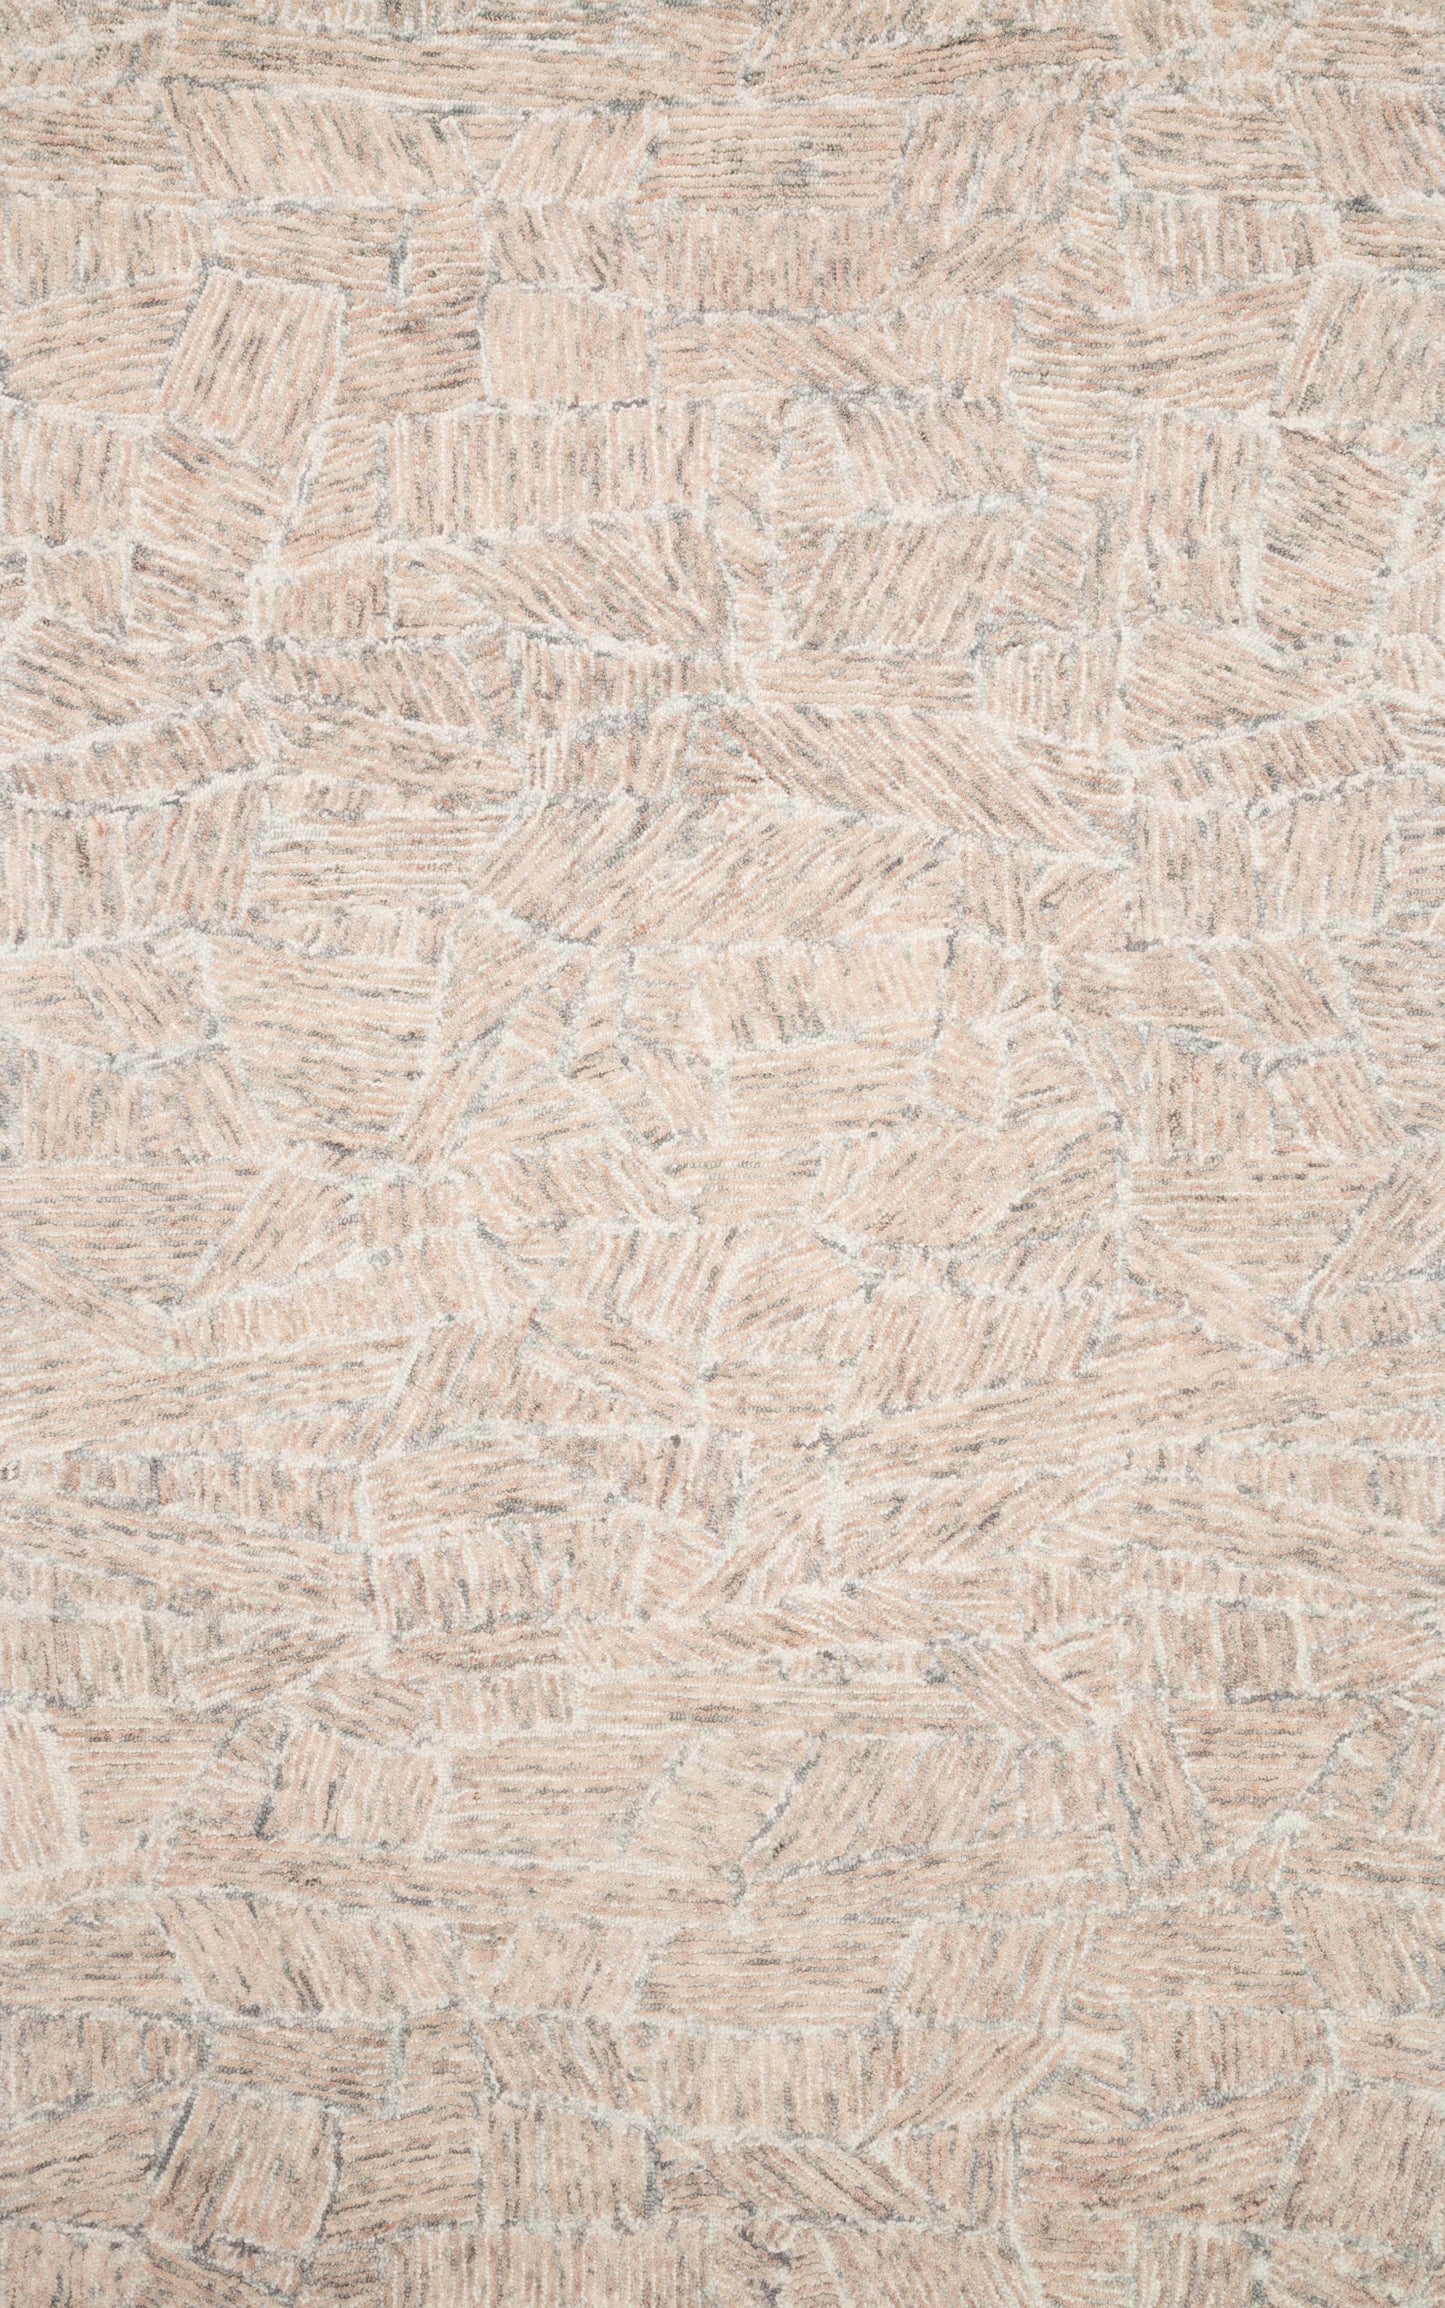 A picture of Loloi's Peregrine rug, in style PER-07, color Blush